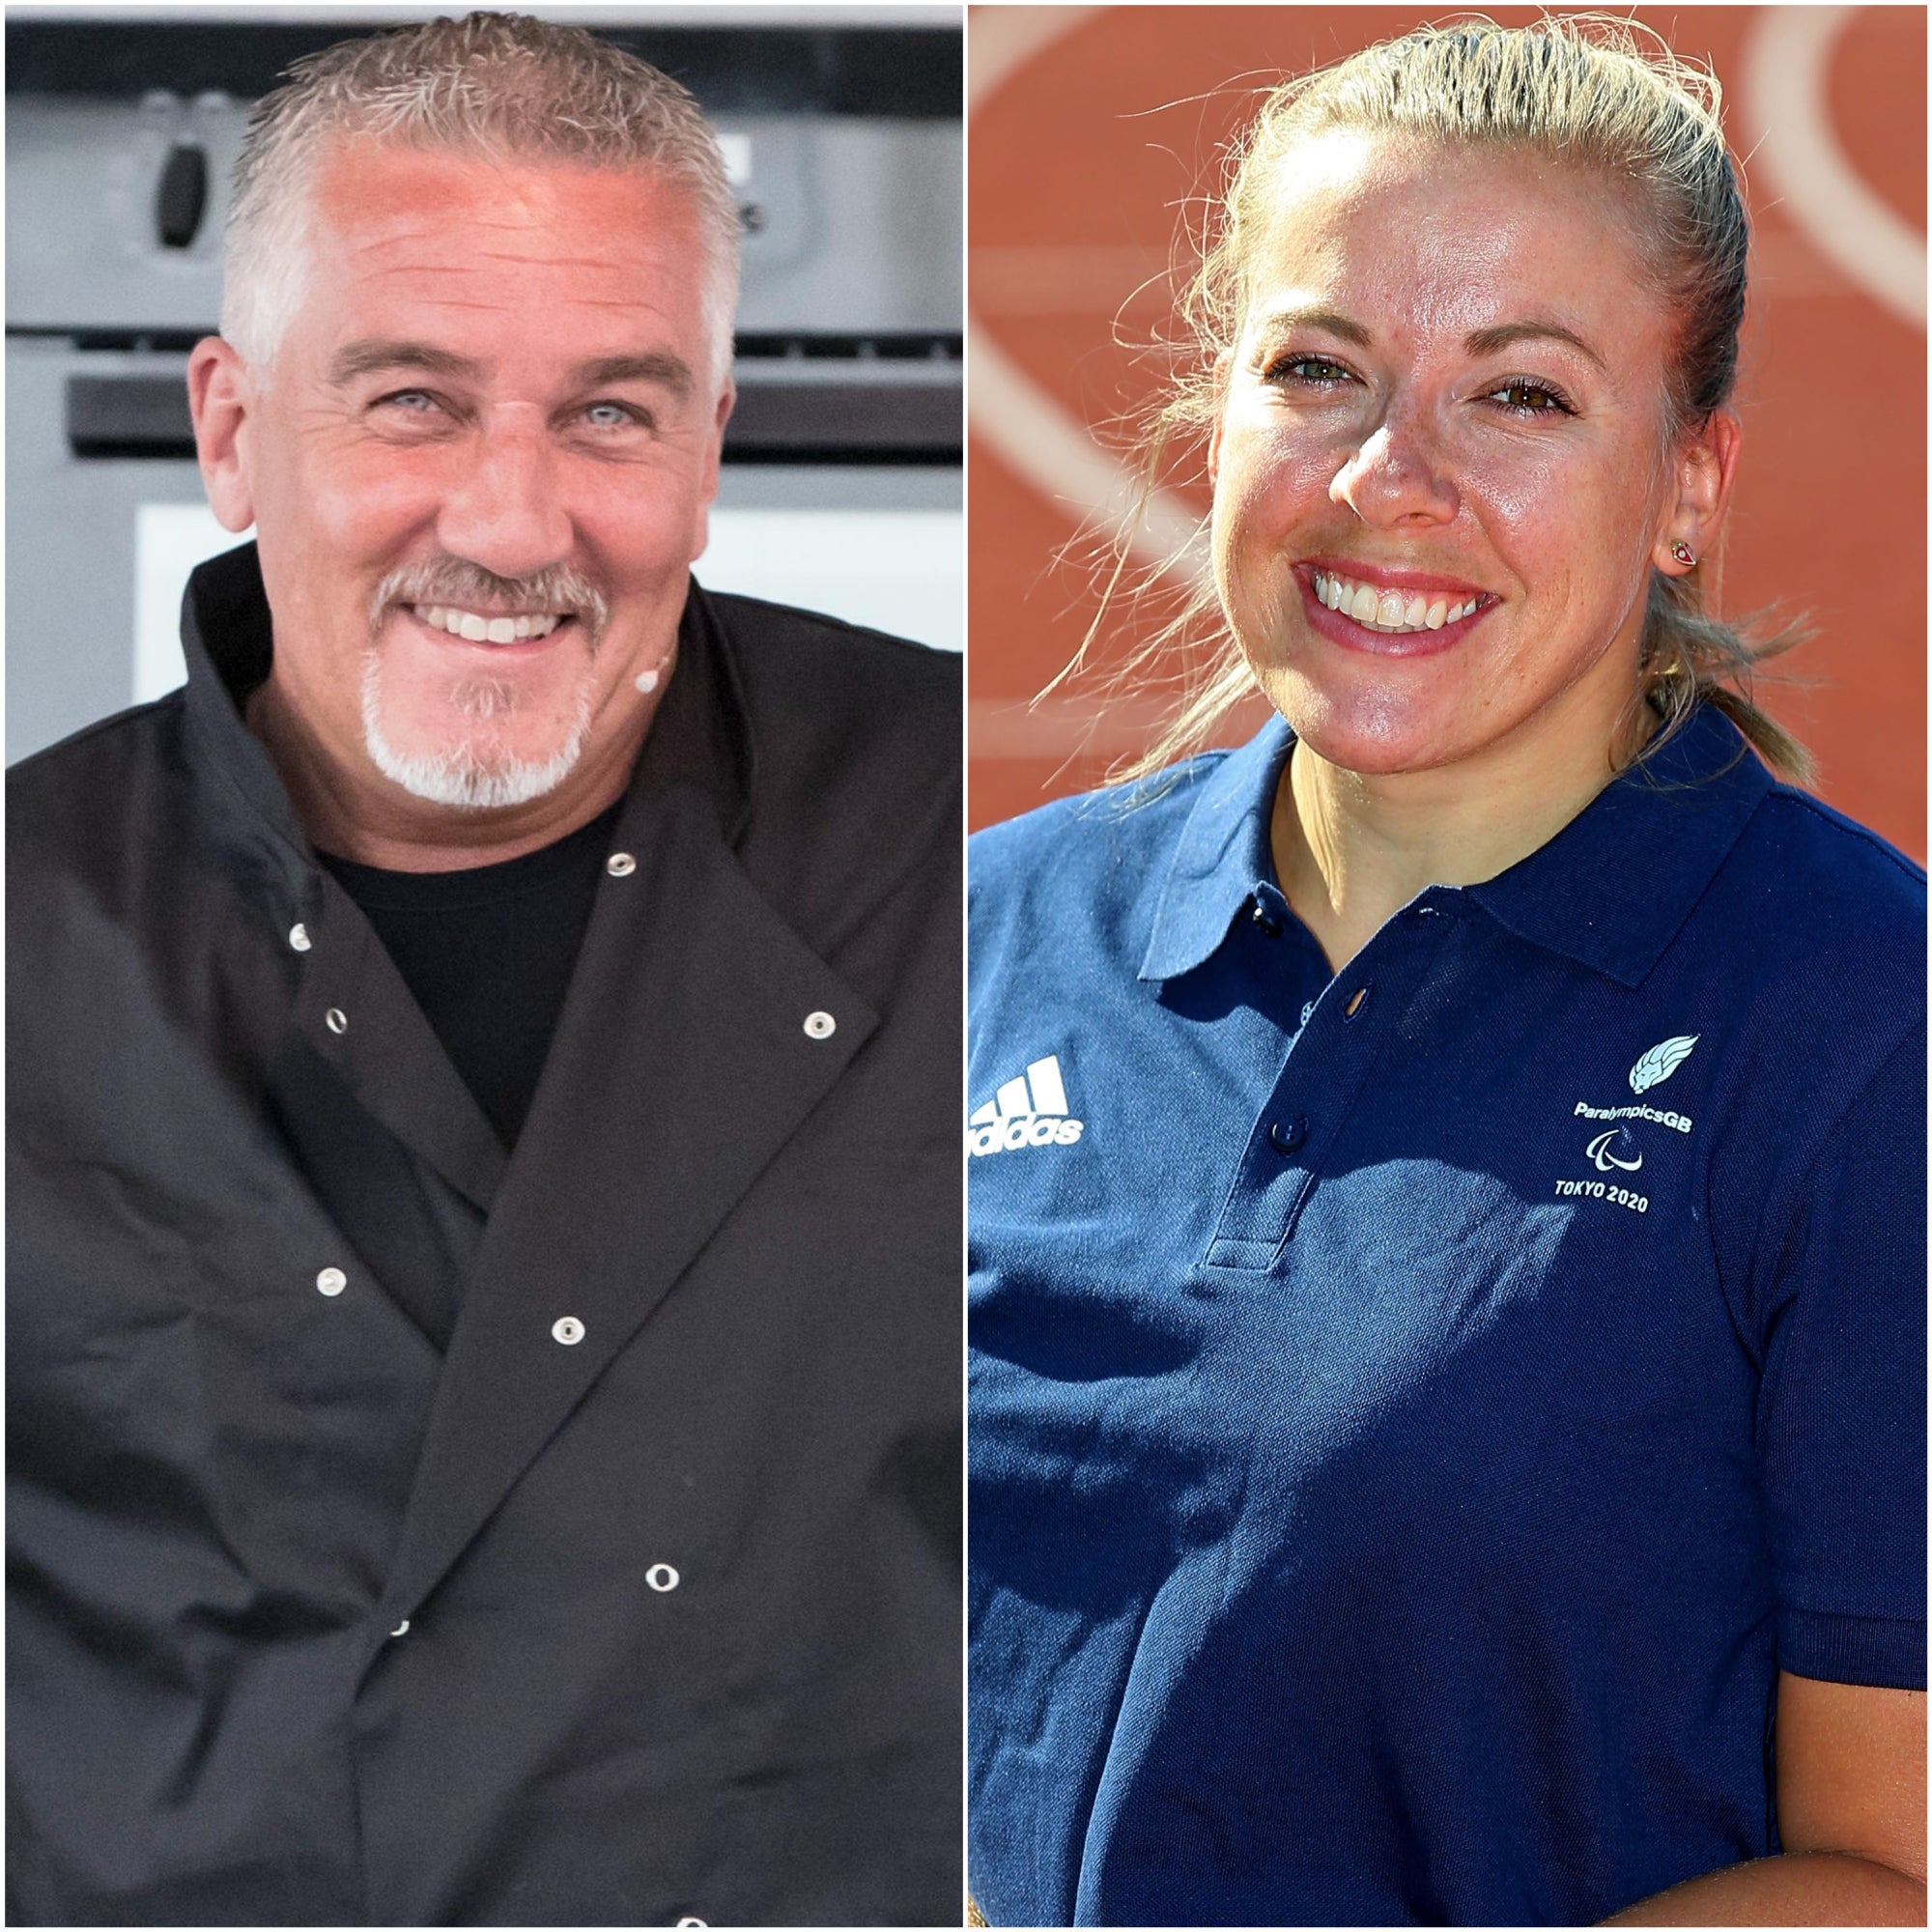 Hannah Cockroft, right, appeared alongside Paul Hollywood on The Great British Bake Off (PA)